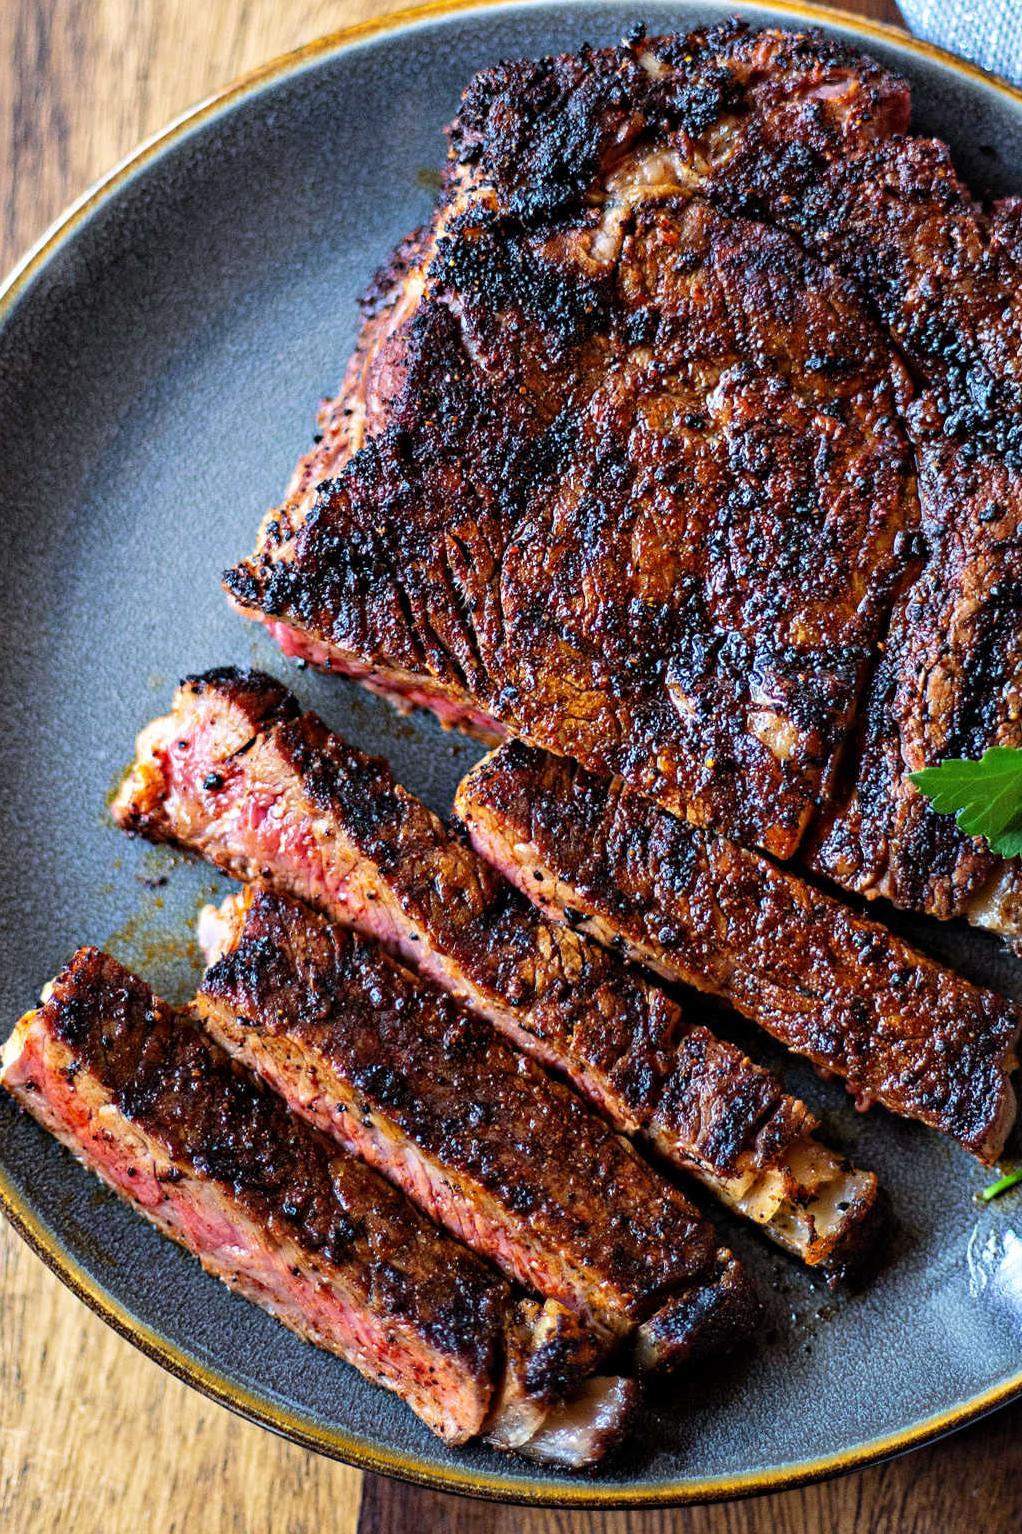 Savory and Scrumptious: Coffee-Rubbed Ribeye Steaks